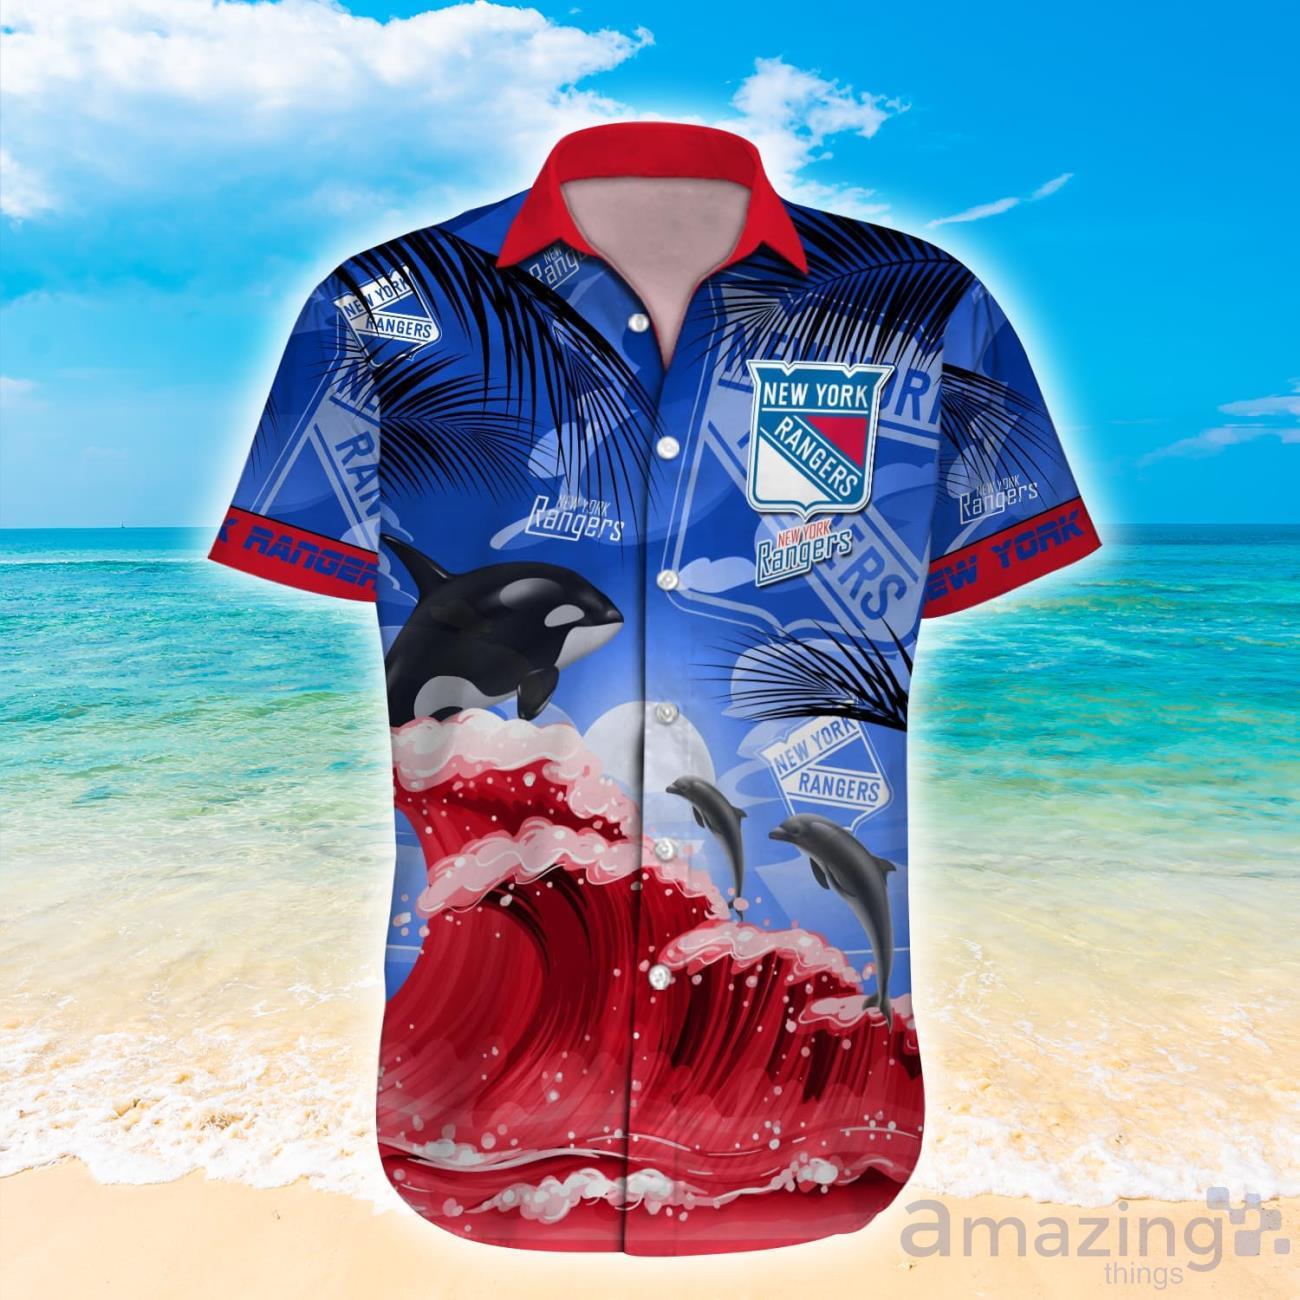 New York Rangers NHL Fan Shirts for sale